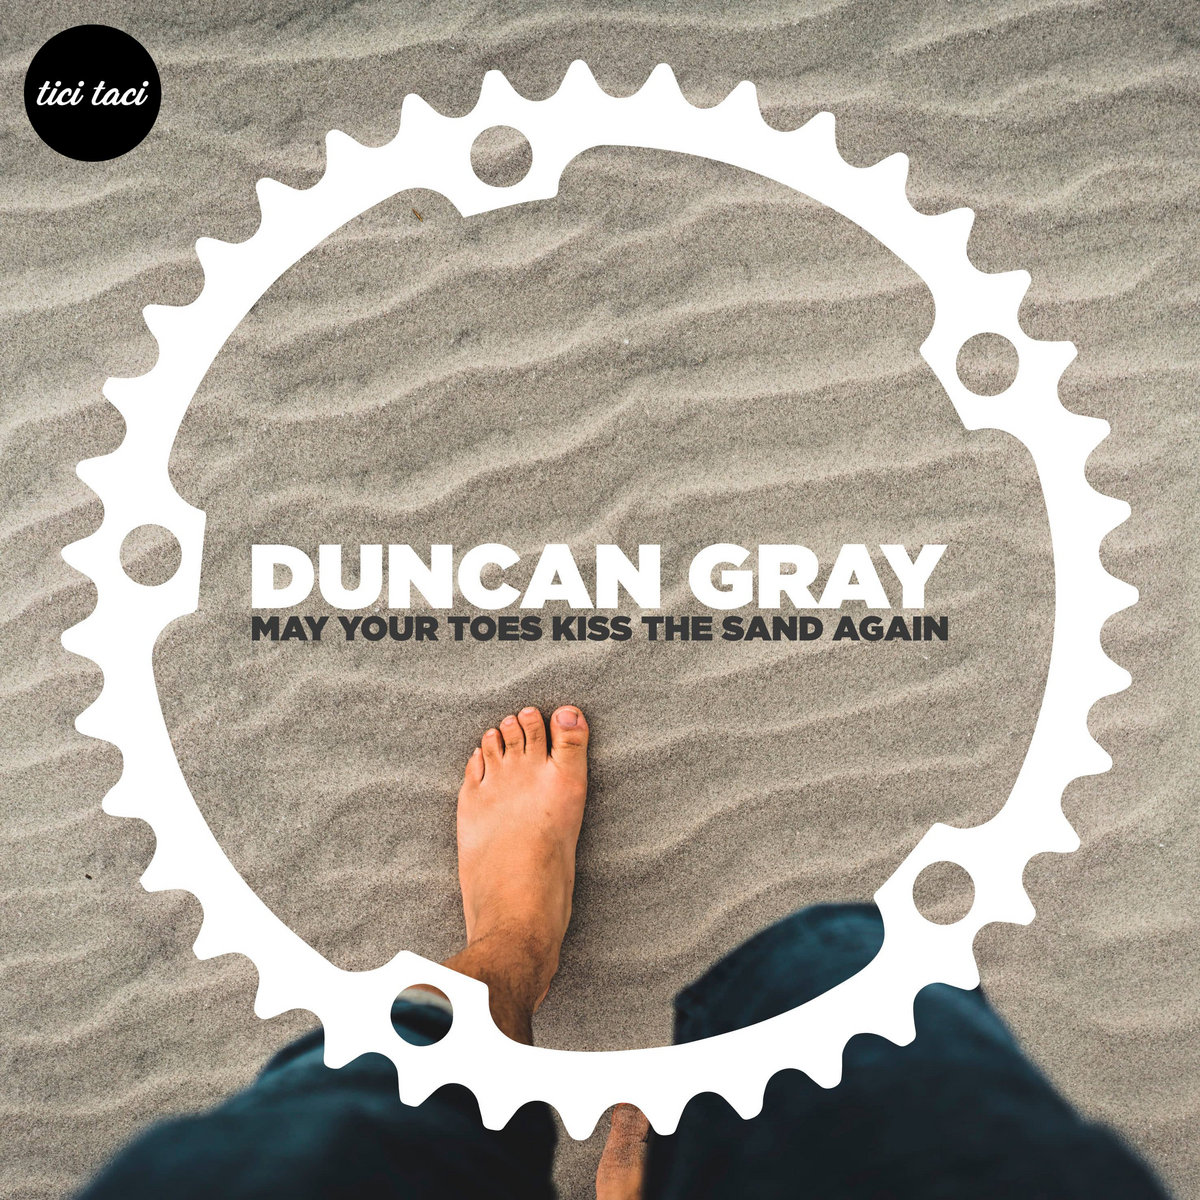 Duncan Gray - May Your Toes Kiss The Sand Again [2021-05-07] (tici taci)